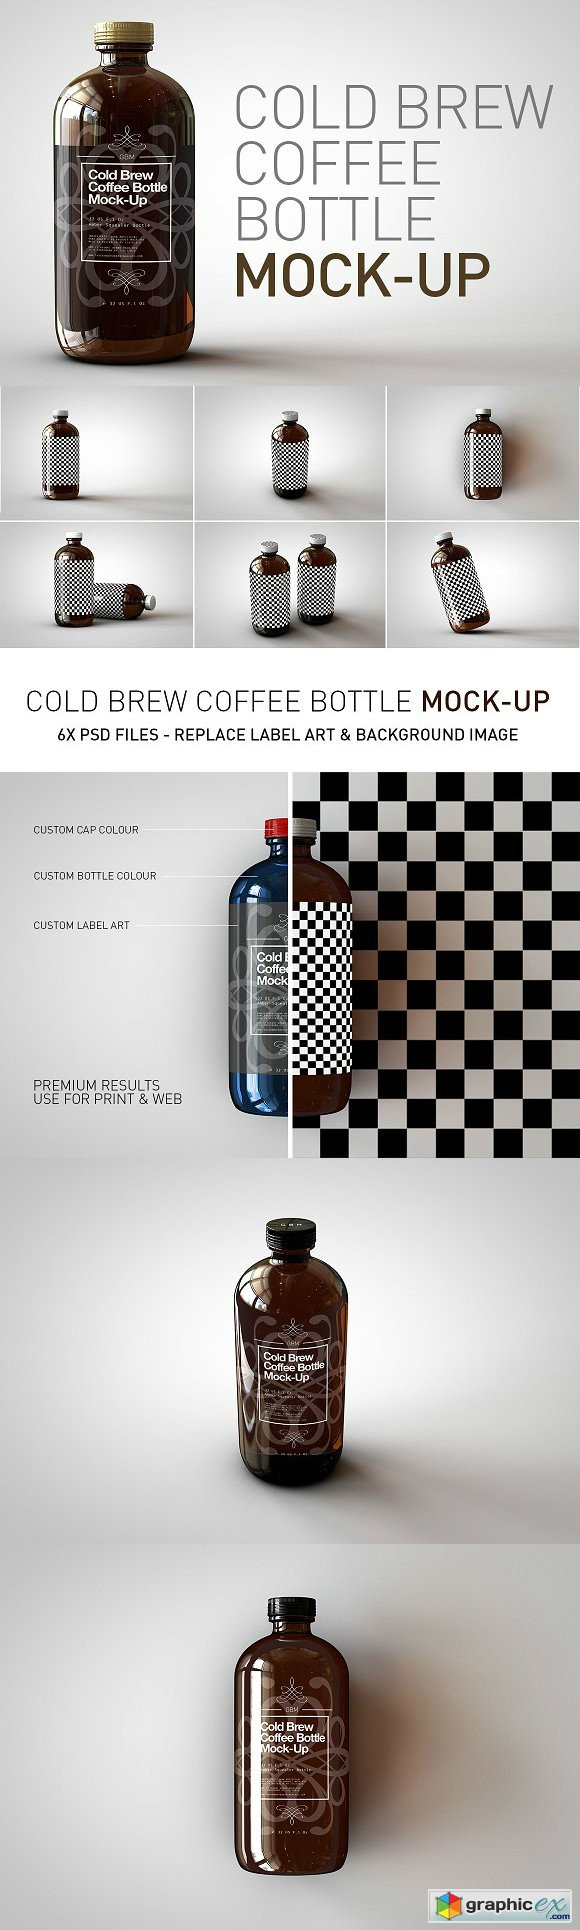 Cold Brew Coffee Bottle Mock-Up 1919862